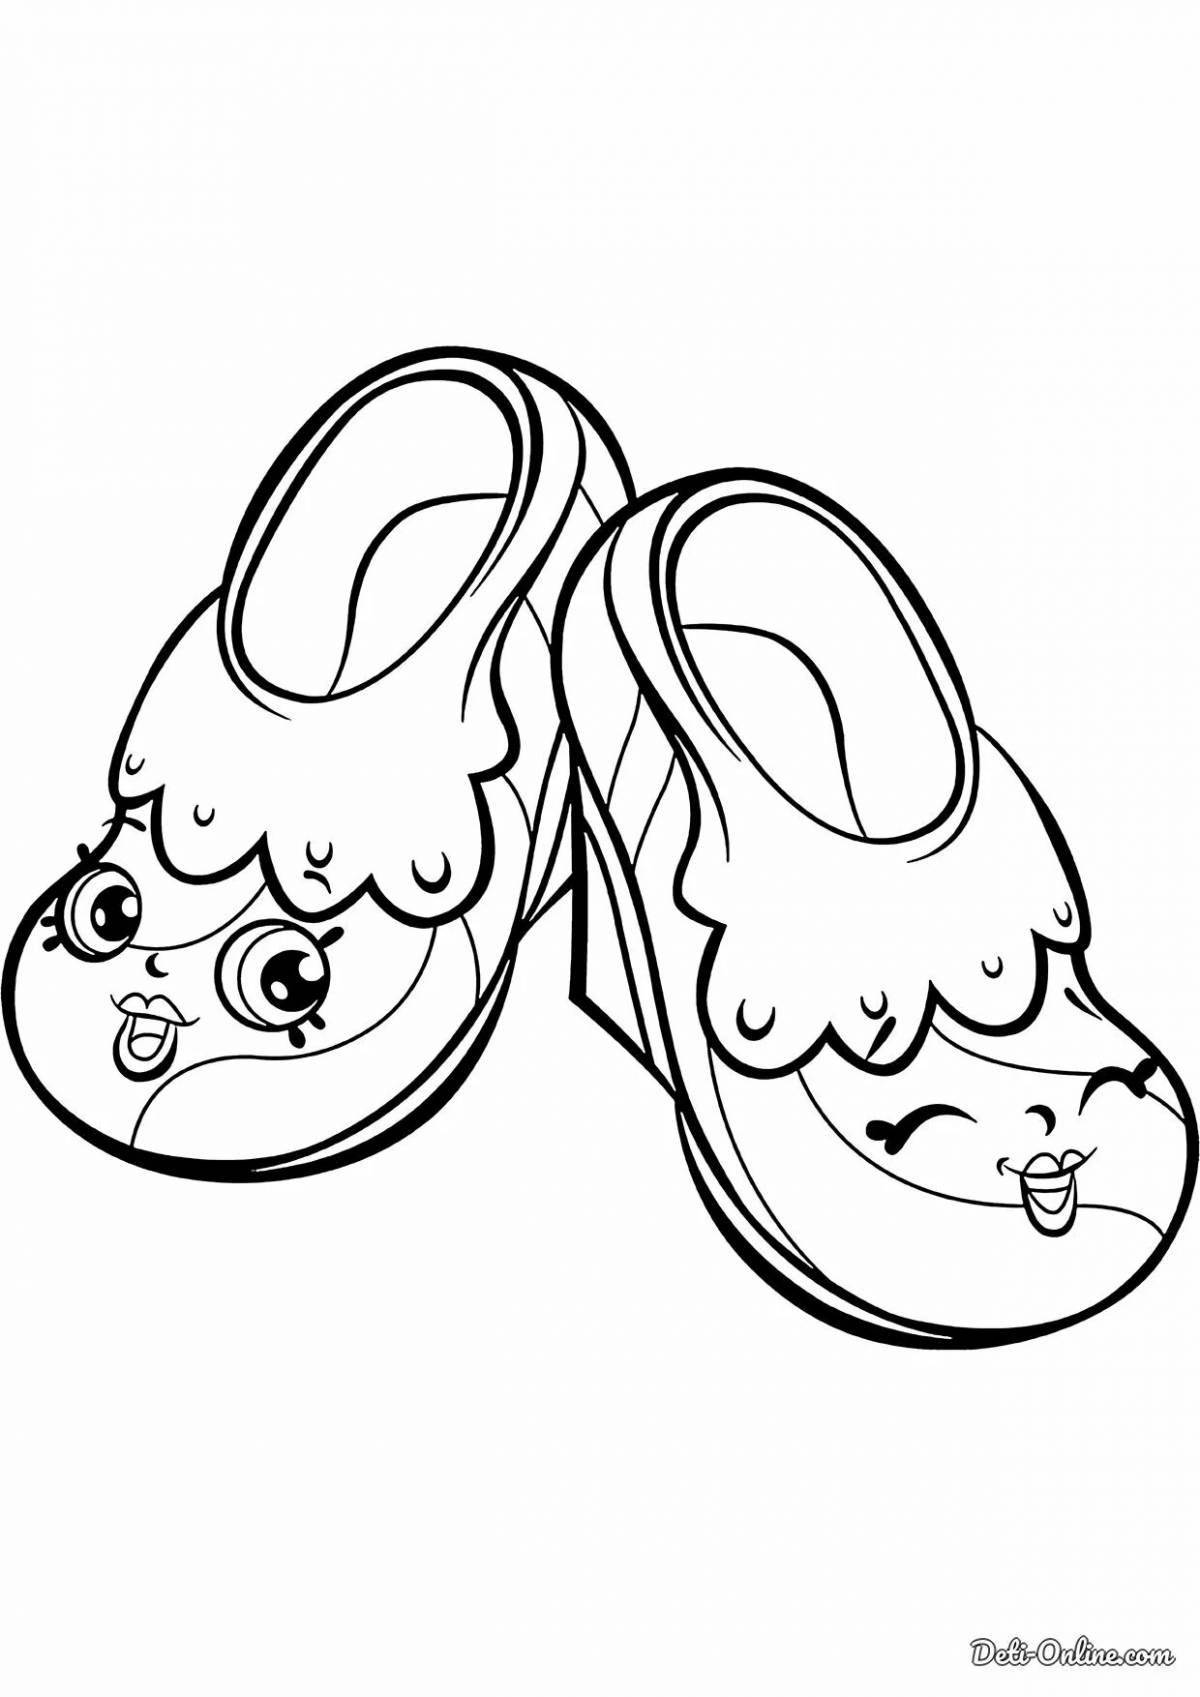 Shiny slippers coloring book for kids